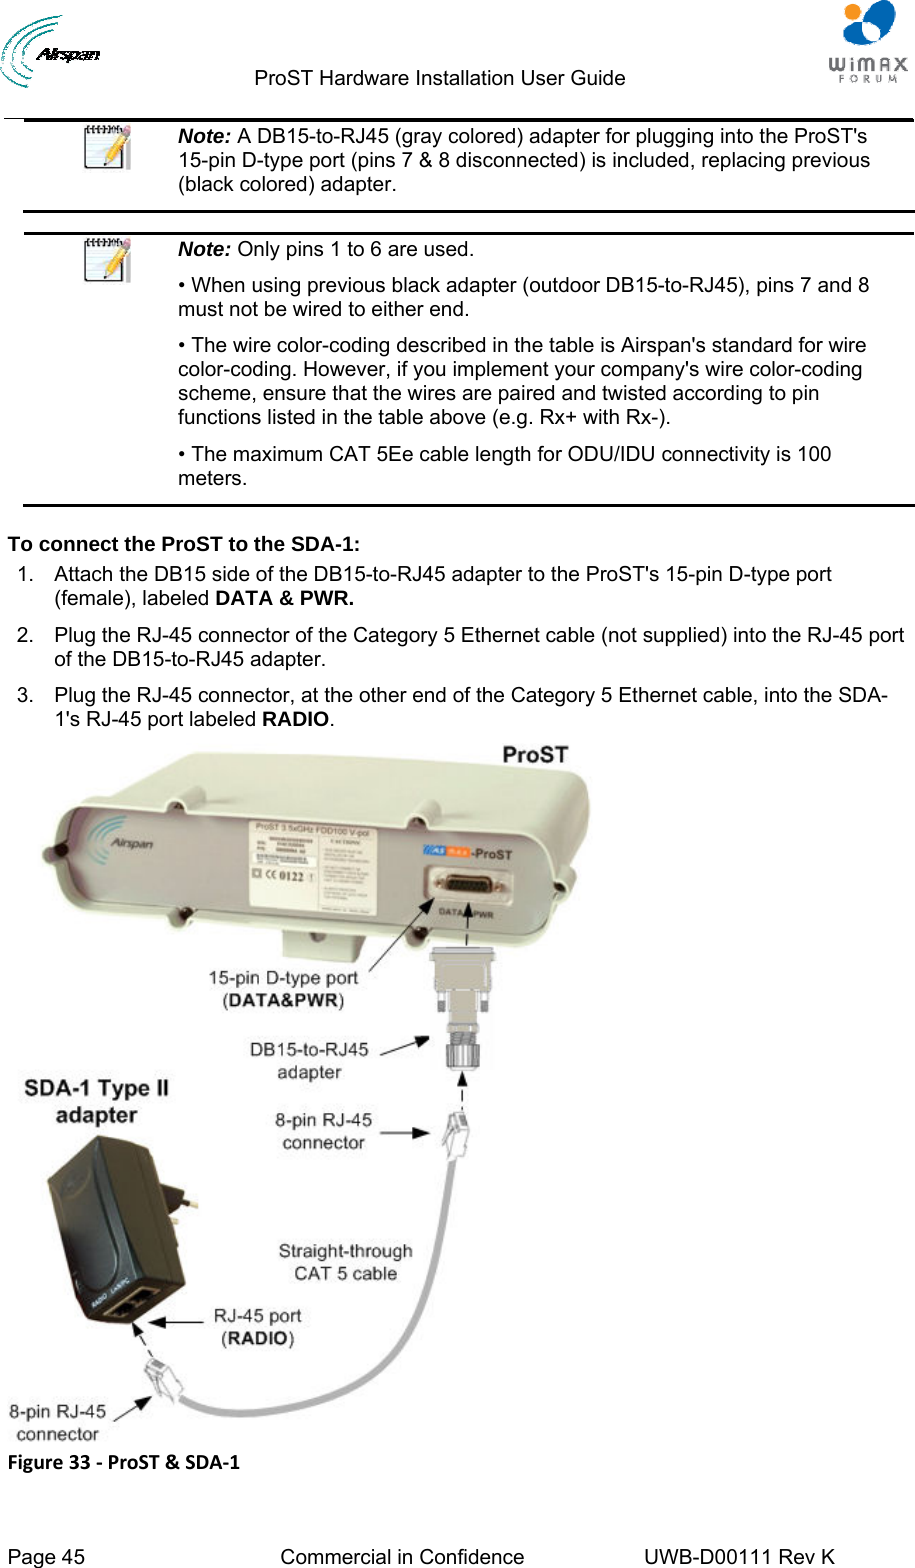                                  ProST Hardware Installation User Guide  Page 45  Commercial in Confidence  UWB-D00111 Rev K    Note: A DB15-to-RJ45 (gray colored) adapter for plugging into the ProST&apos;s 15-pin D-type port (pins 7 &amp; 8 disconnected) is included, replacing previous (black colored) adapter.   Note: Only pins 1 to 6 are used. • When using previous black adapter (outdoor DB15-to-RJ45), pins 7 and 8 must not be wired to either end. • The wire color-coding described in the table is Airspan&apos;s standard for wire color-coding. However, if you implement your company&apos;s wire color-coding scheme, ensure that the wires are paired and twisted according to pin functions listed in the table above (e.g. Rx+ with Rx-). • The maximum CAT 5Ee cable length for ODU/IDU connectivity is 100 meters.  To connect the ProST to the SDA-1: 1.  Attach the DB15 side of the DB15-to-RJ45 adapter to the ProST&apos;s 15-pin D-type port (female), labeled DATA &amp; PWR. 2.  Plug the RJ-45 connector of the Category 5 Ethernet cable (not supplied) into the RJ-45 port of the DB15-to-RJ45 adapter. 3.  Plug the RJ-45 connector, at the other end of the Category 5 Ethernet cable, into the SDA-1&apos;s RJ-45 port labeled RADIO.  Figure33‐ProST&amp;SDA‐1